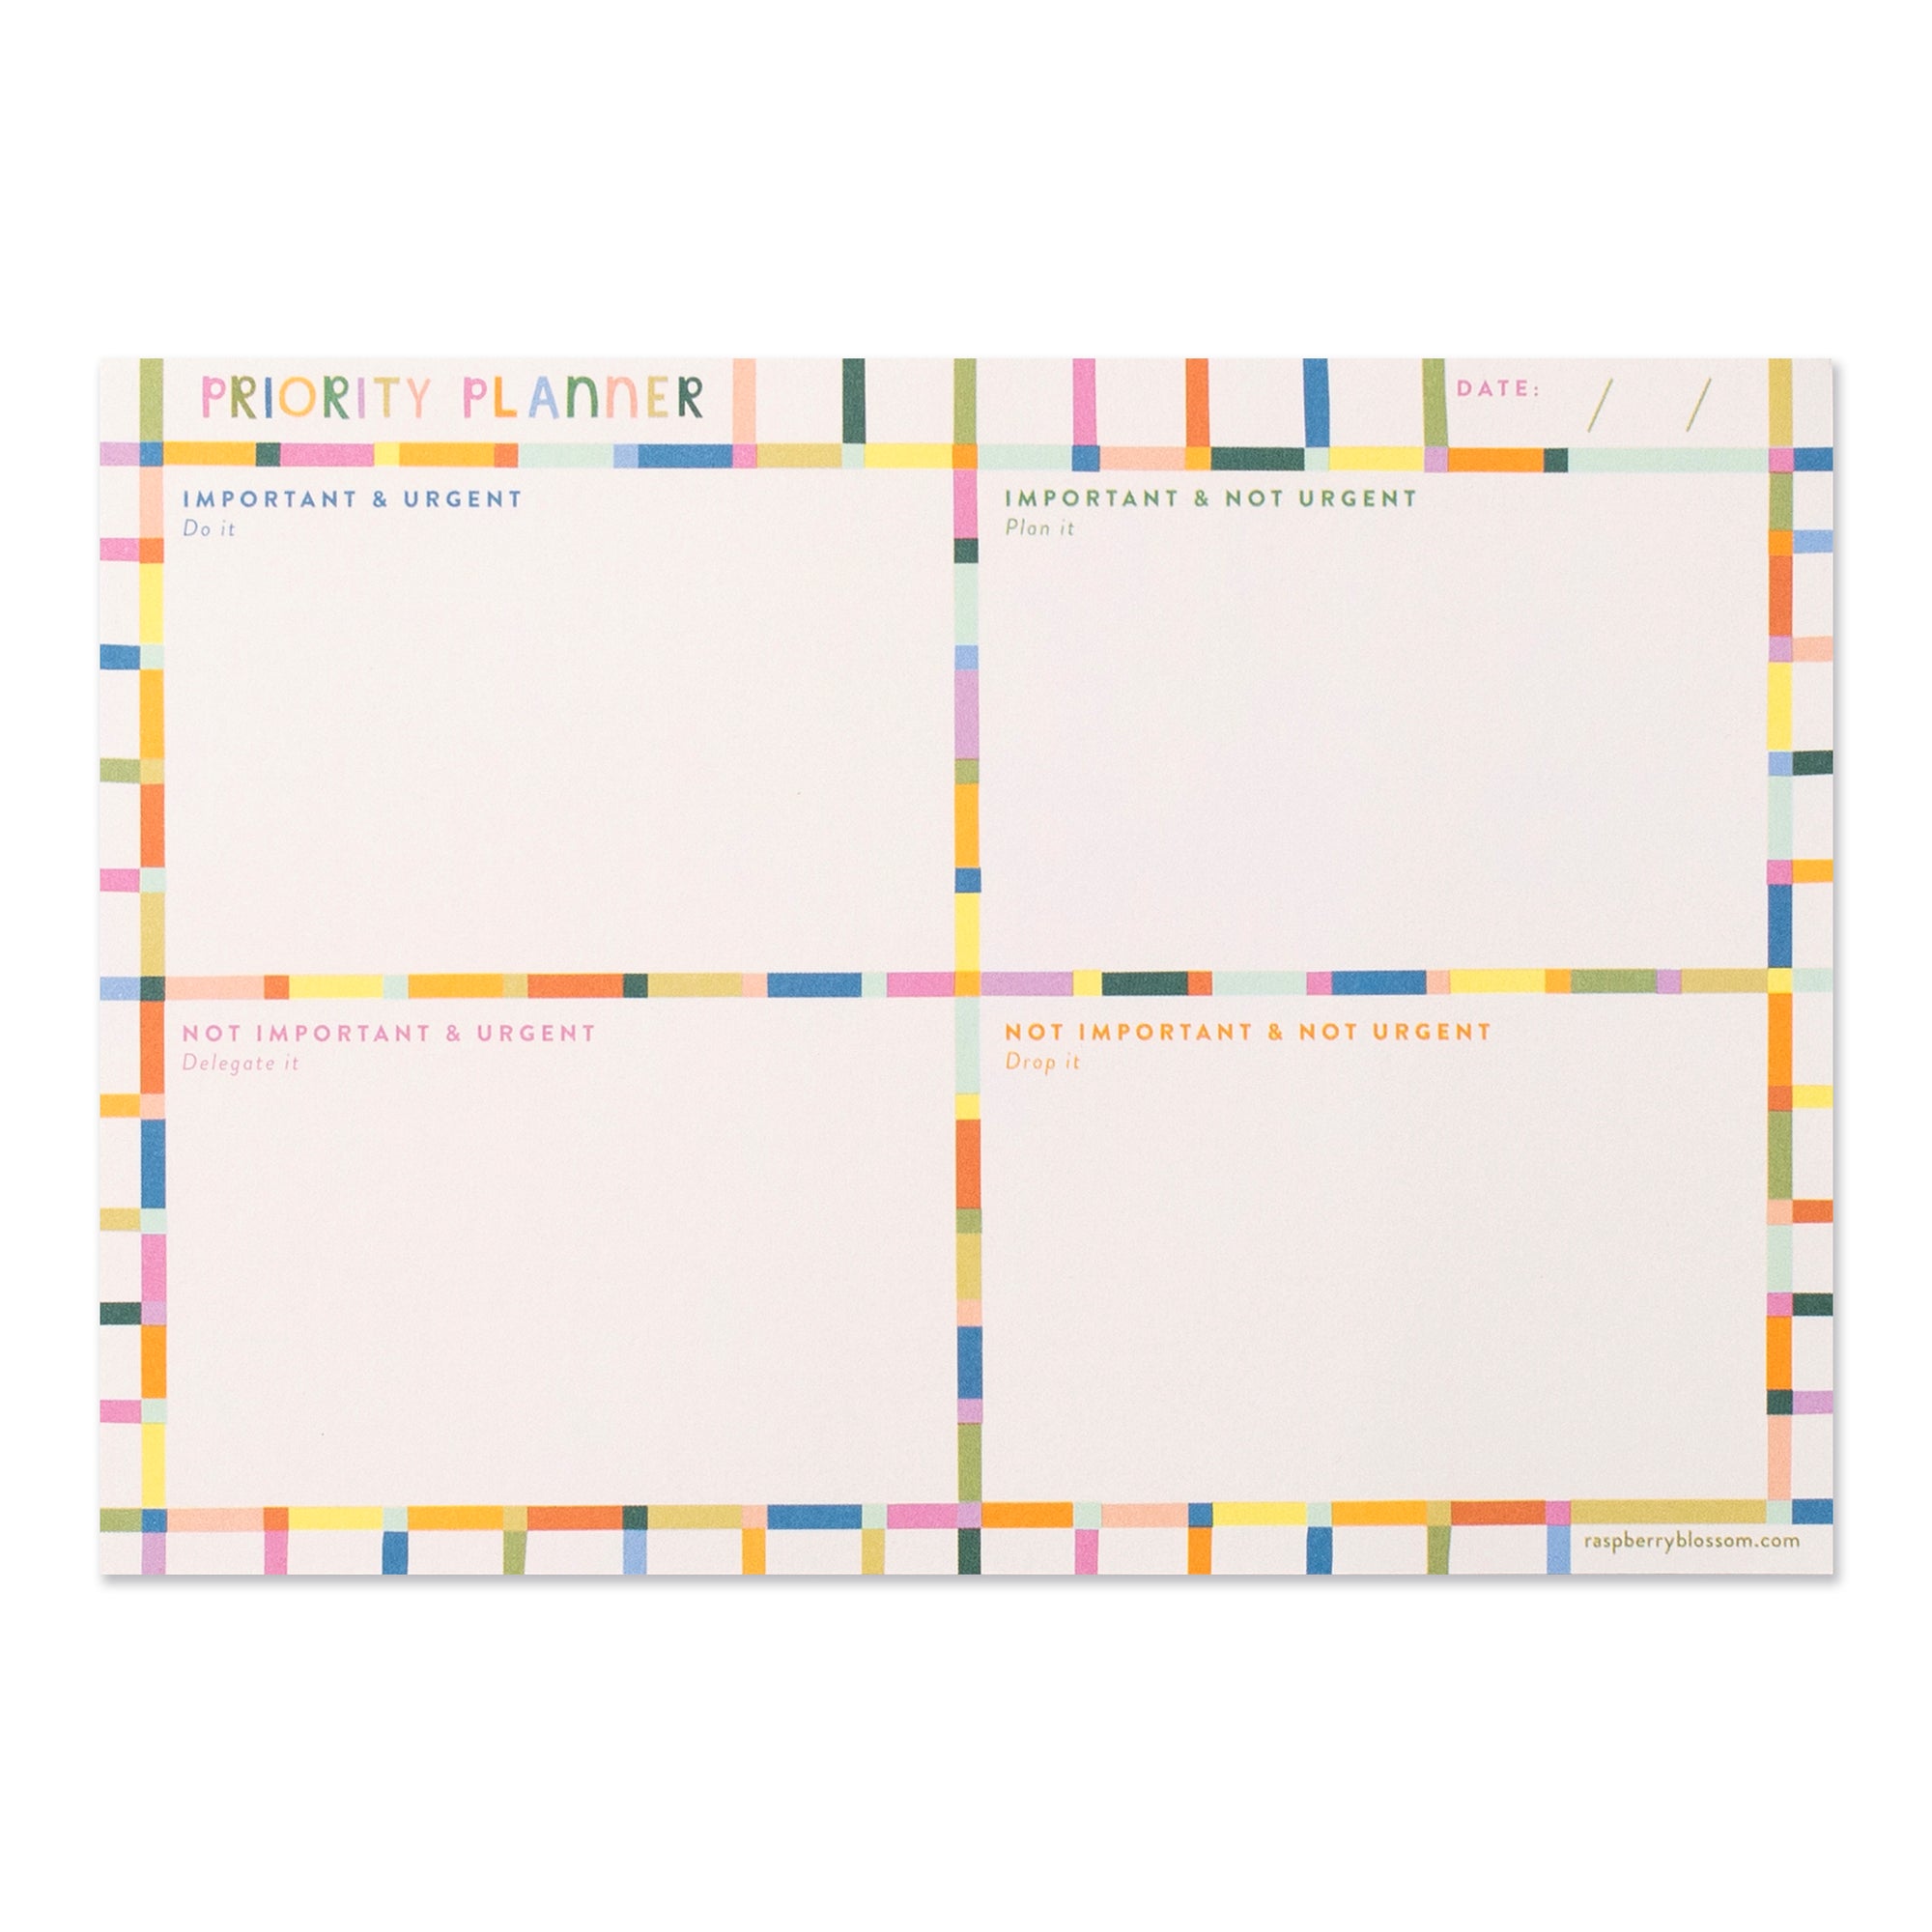 A cream coloured rectangular notepad with the title 'Priority Planner'. It has an outline colourful grid pattern that helps break down the notepad into 4 blocks as follows: Important & Urgent, Important & Not Urgent, Not Important & Urgent, Not Important & Not Urgent.